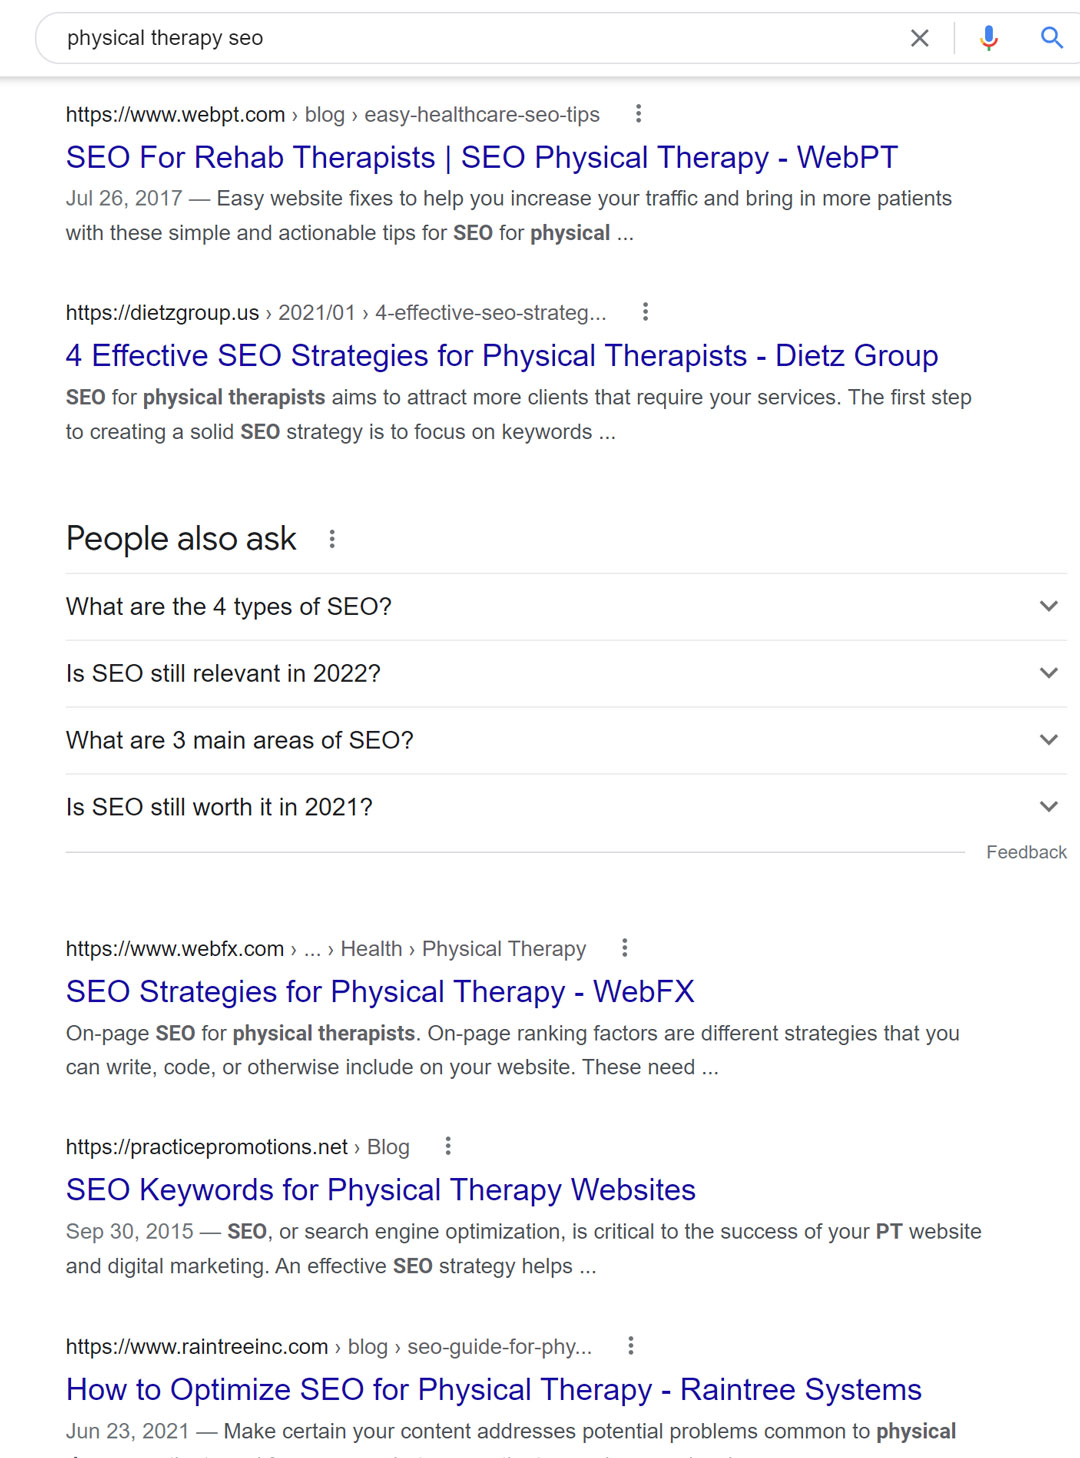 Google Search Results for Physical Therapy SEO